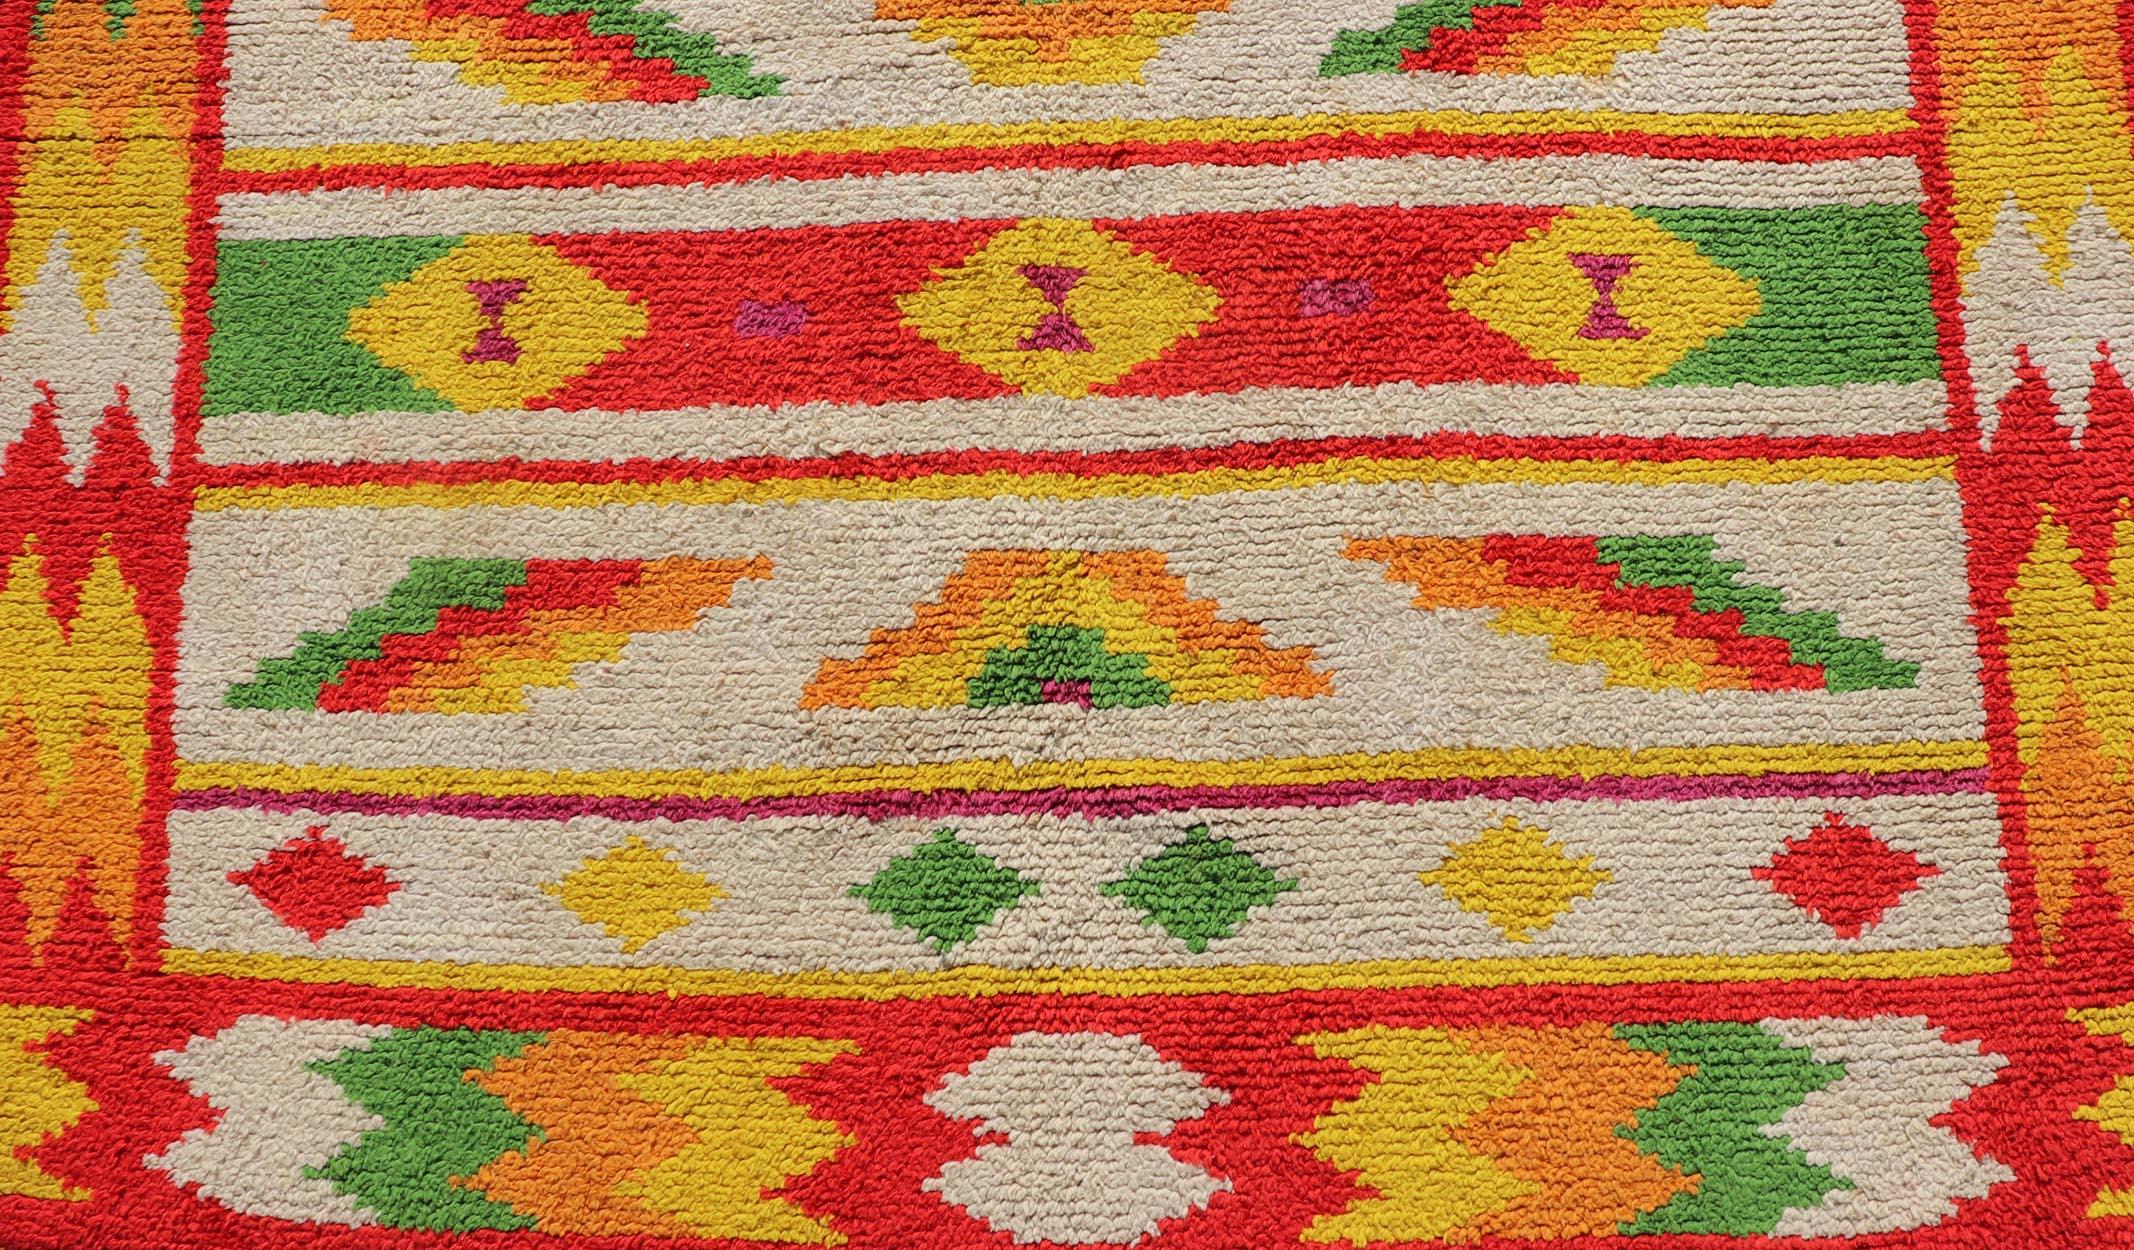 Vintage Moroccan Rug with All-Over Tribal Motif Design In Red, Green & Yellow In Good Condition For Sale In Atlanta, GA